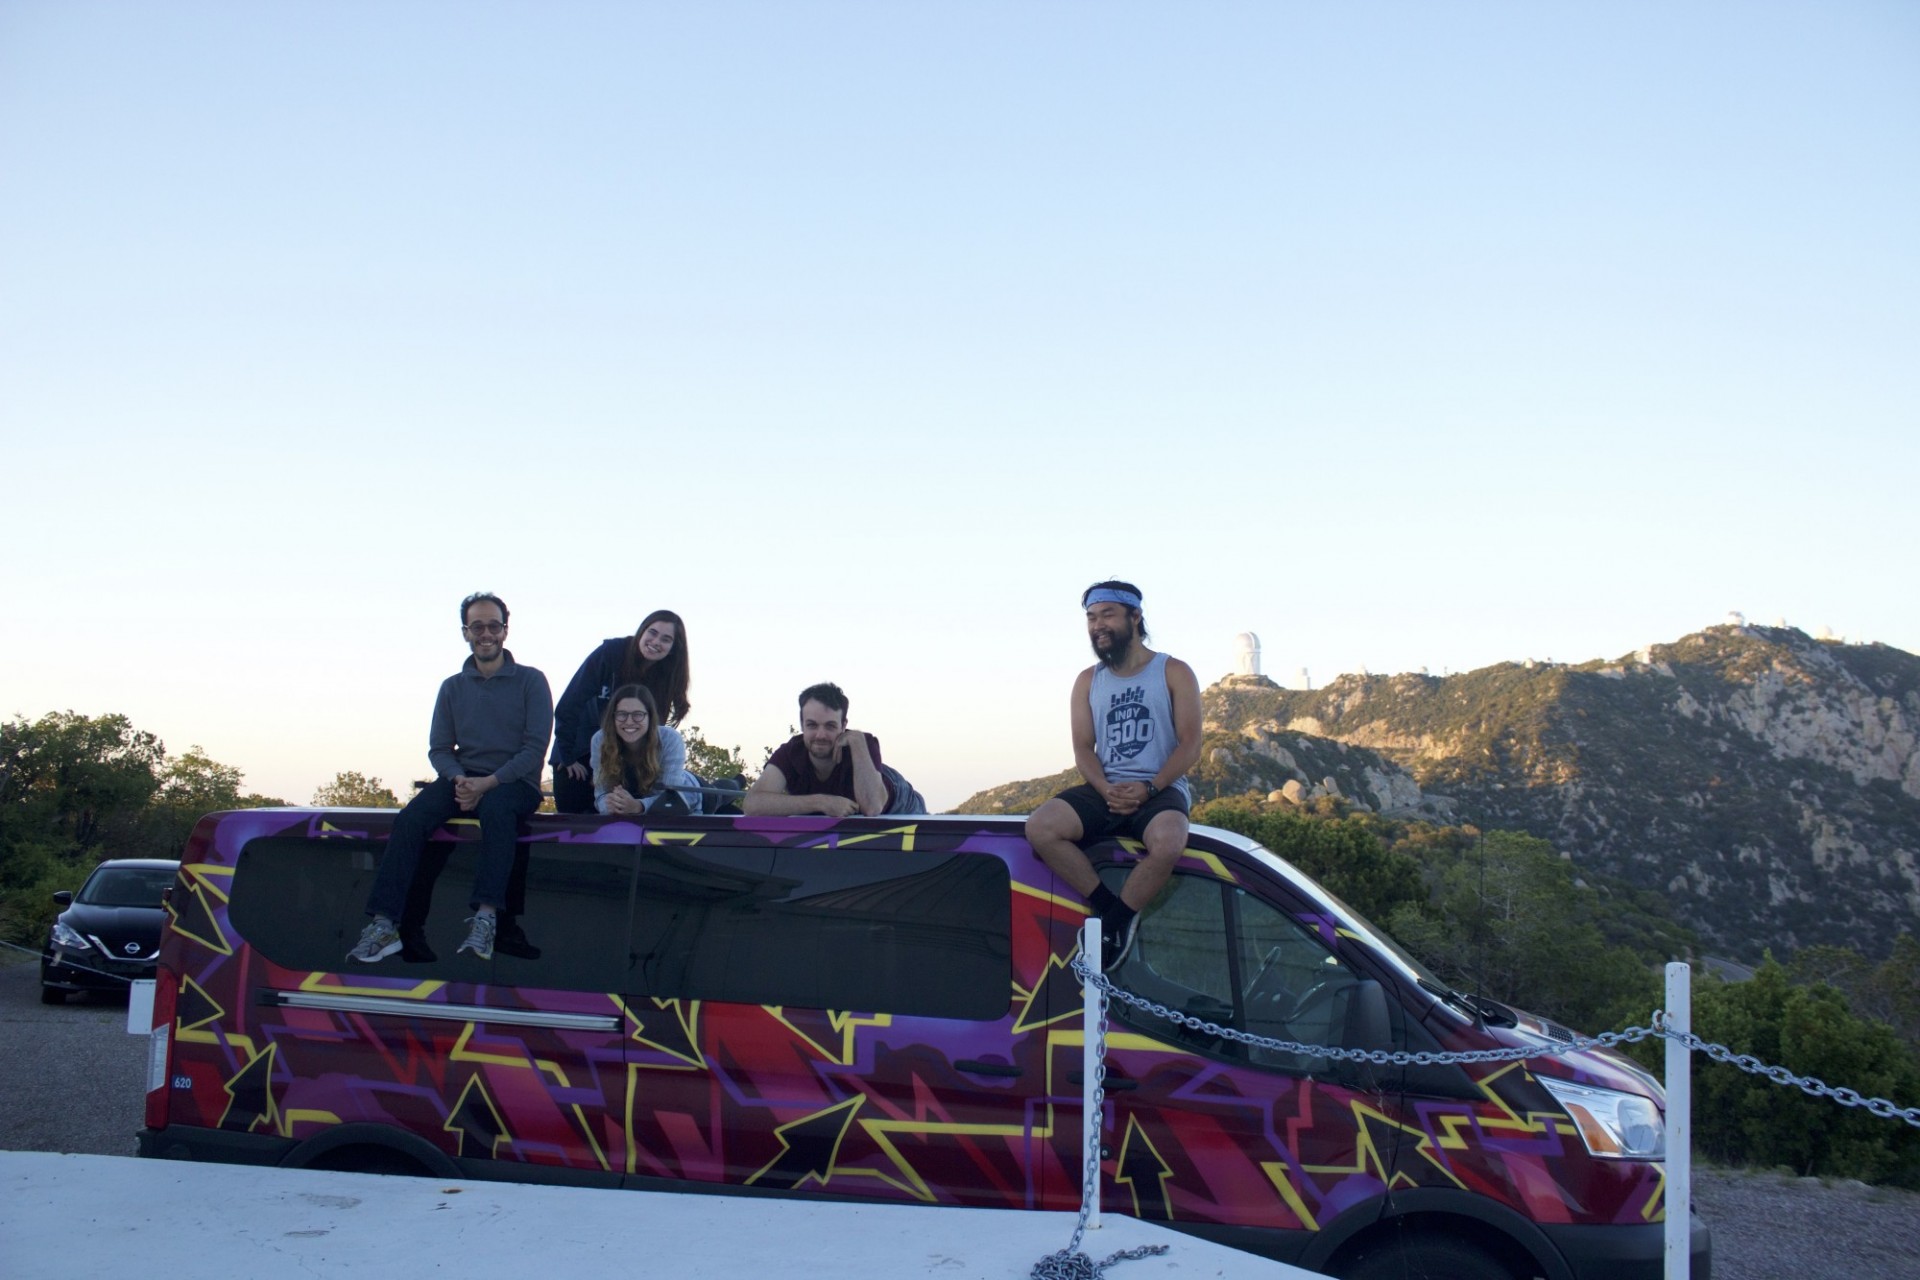 Group on top of a multicolored van with Kitt Peak as background, as seen from the MDM Observatory.